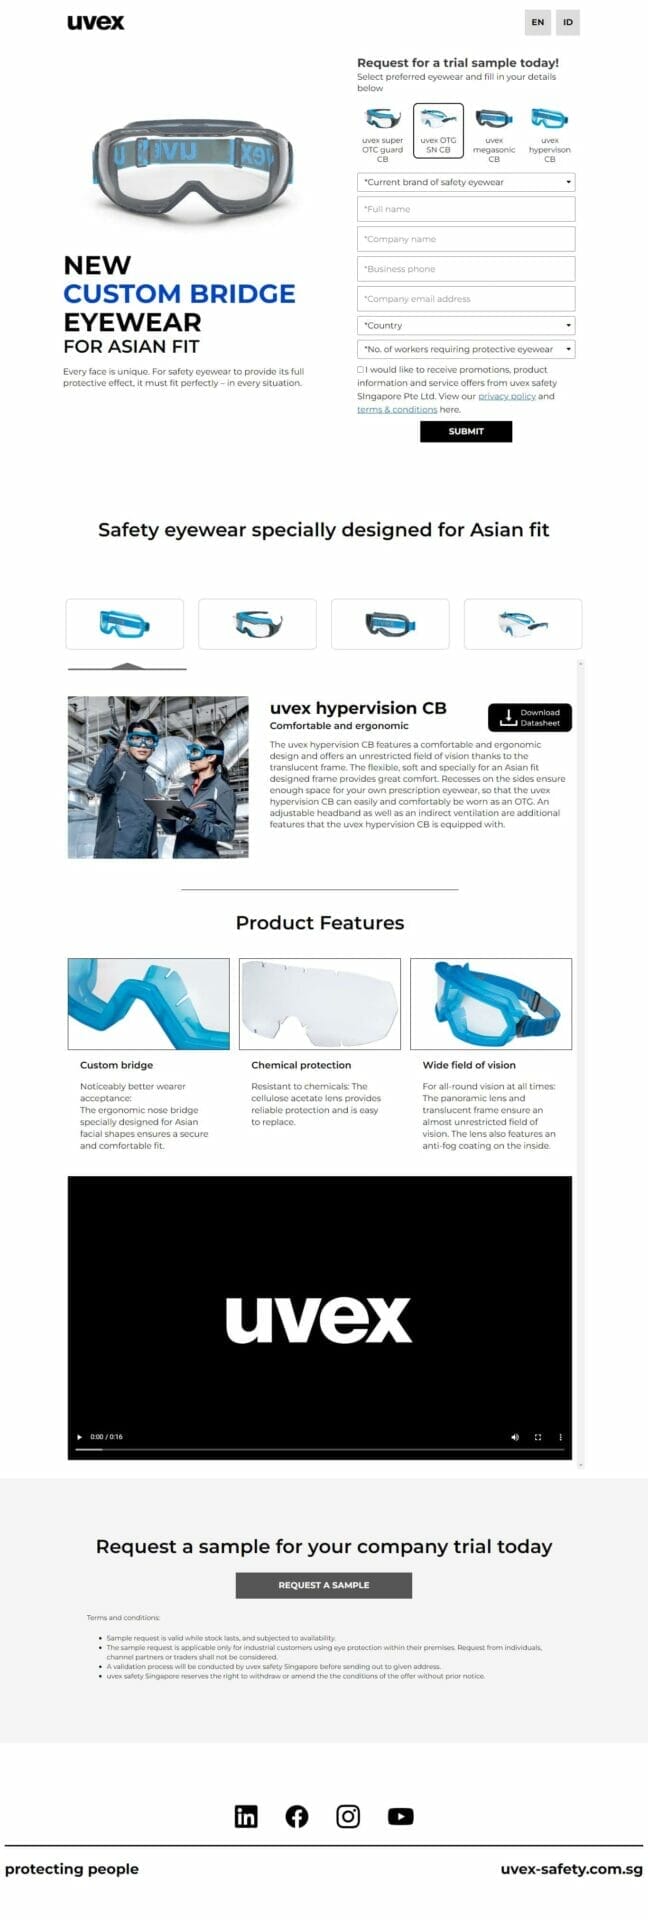 A WordPress website design for Livex goggles, specializing in web development for safety gears.